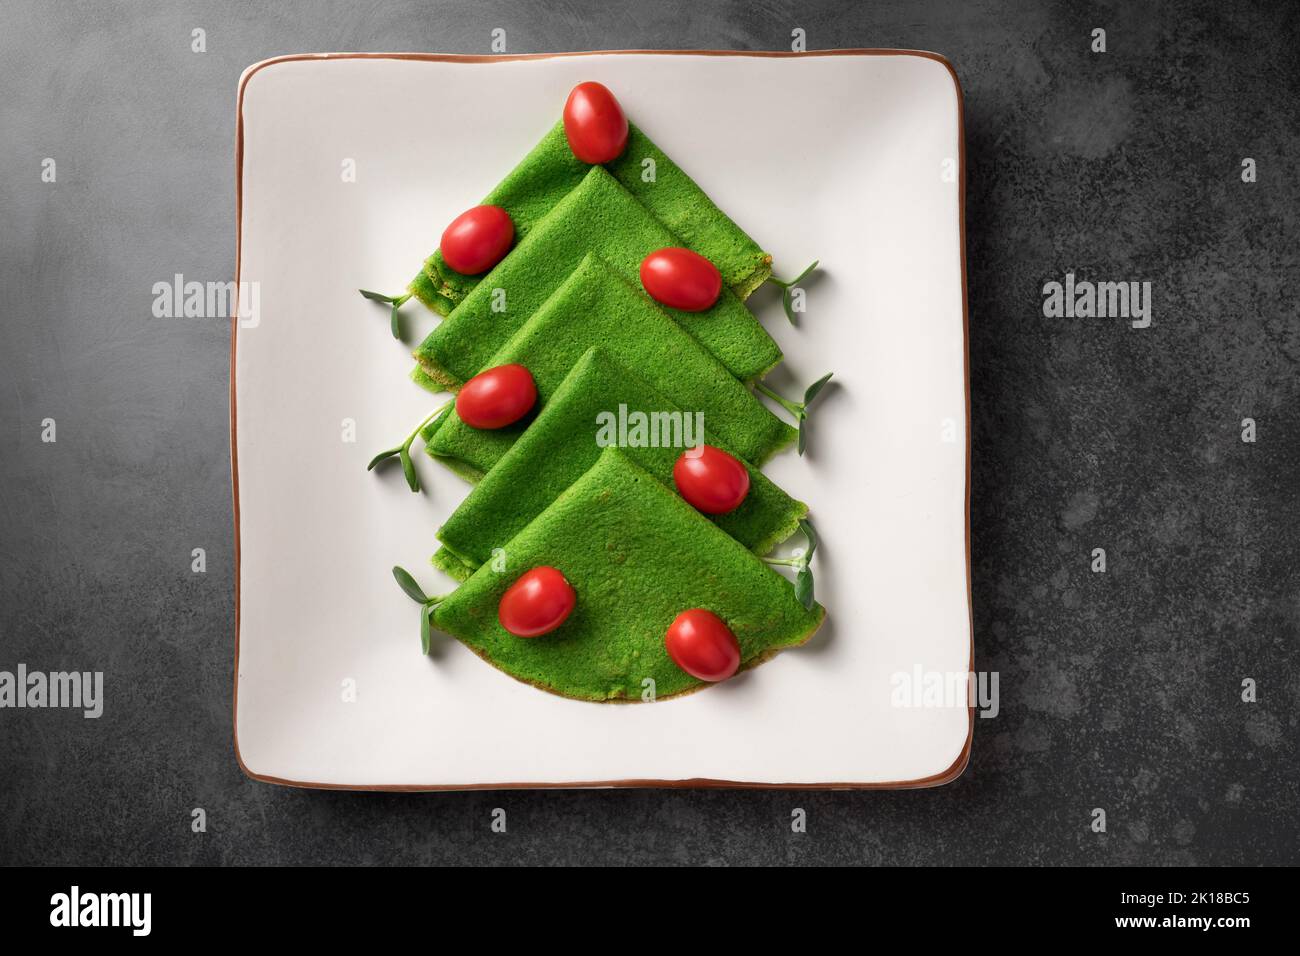 Christmas tree made of green spinach thin pancakes Stock Photo